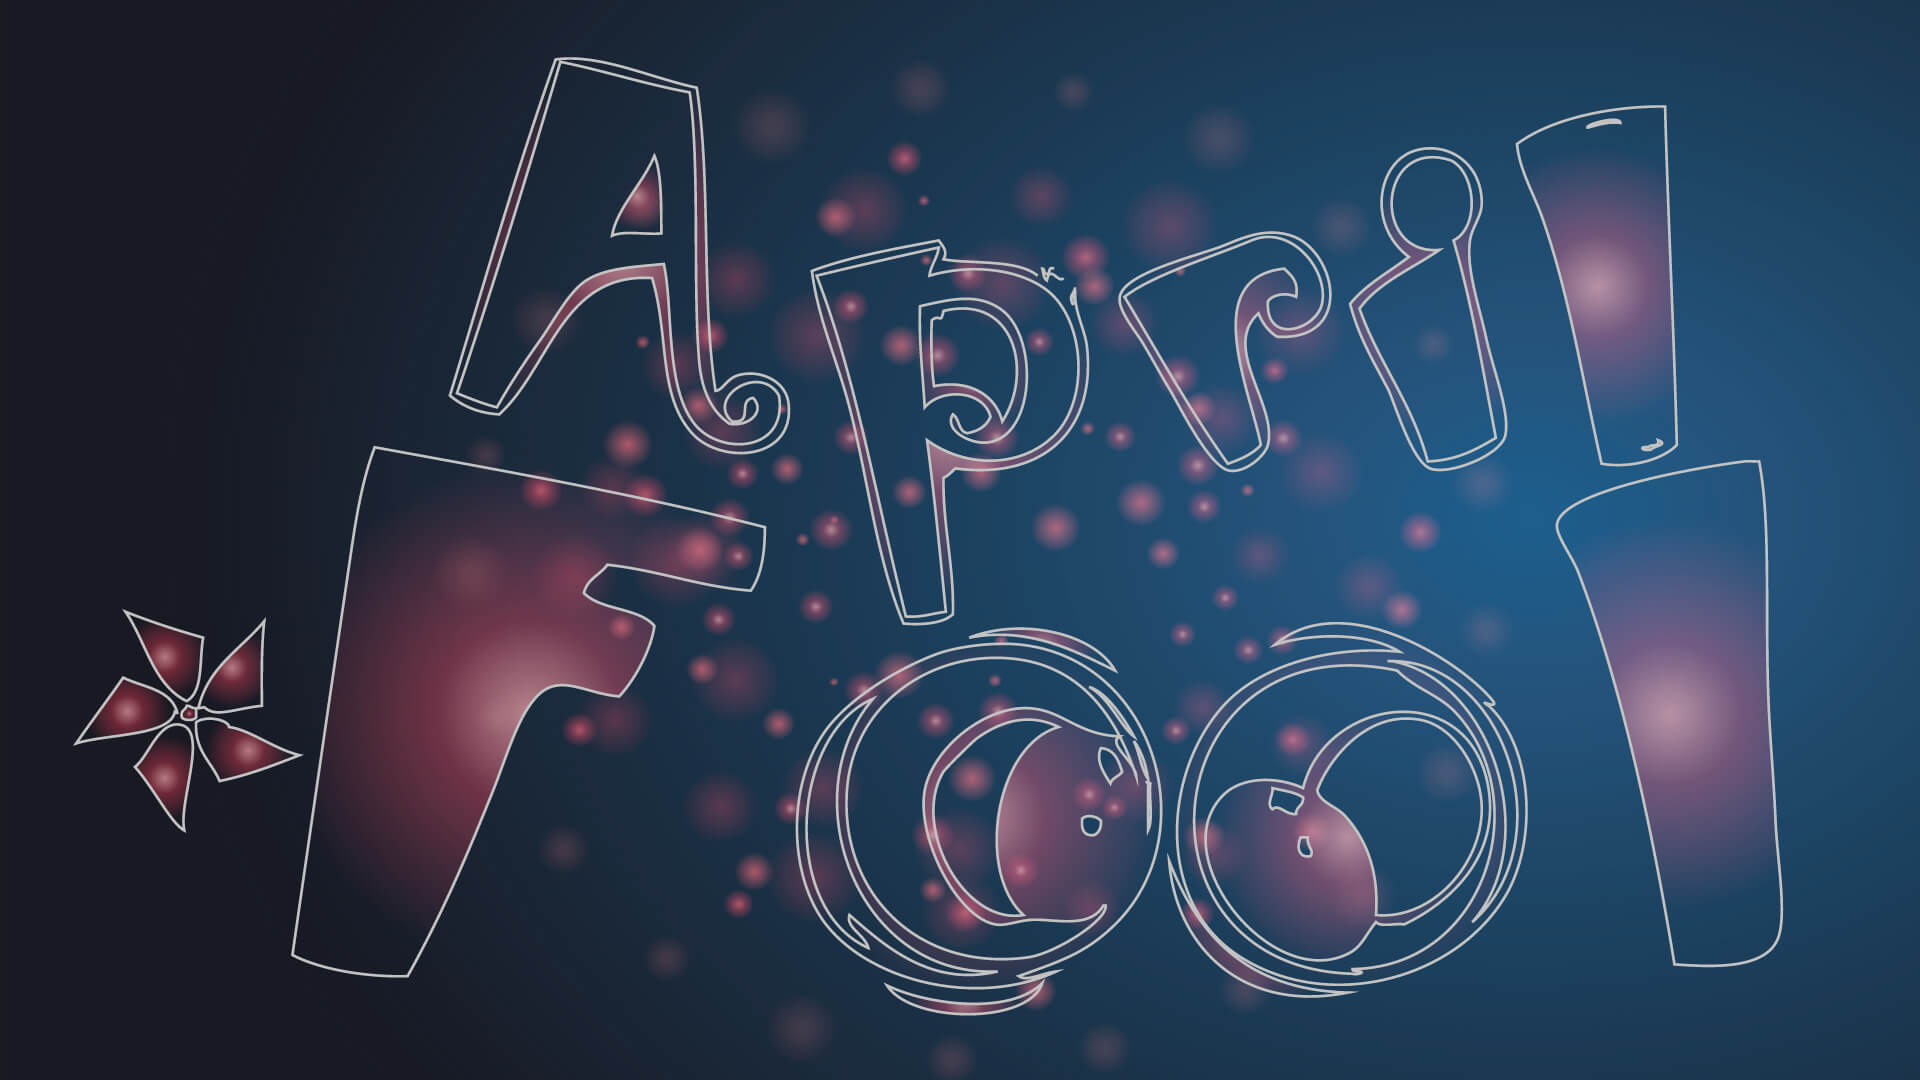 Google steps up its April Fools game, writes Android app for the occasion